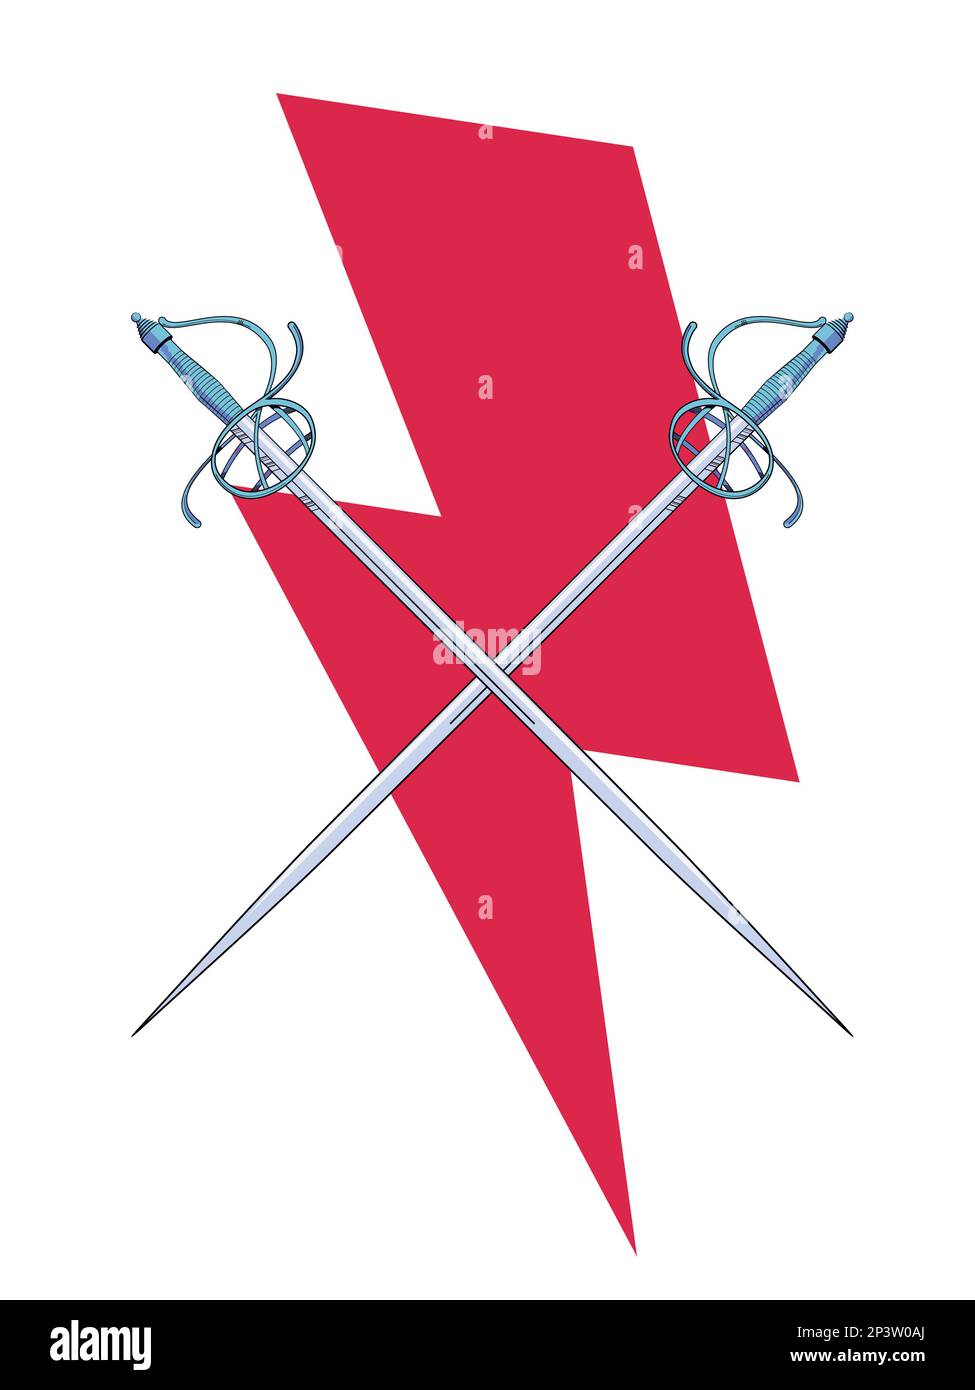 Vector illustration of two clashing swords over the symbol of red thunderbolt. Ideal design for chivalry and adventure comics. Stock Vector